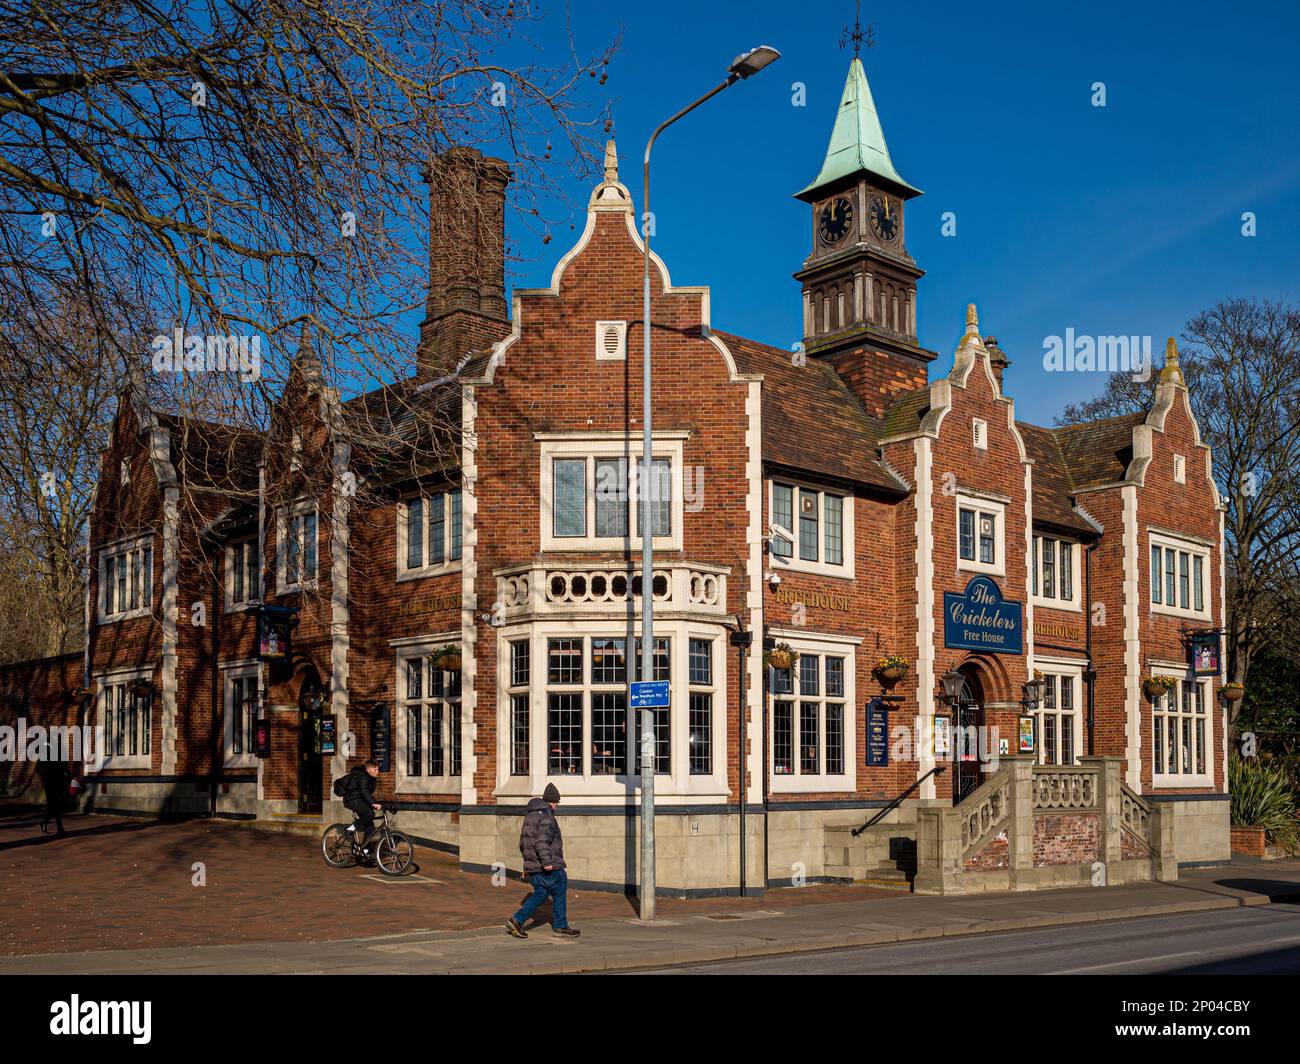 The Cricketers Pub Ipwsich - JD Wetherspoons Pub purpose built as a pub in the 1930s. Stock Photo